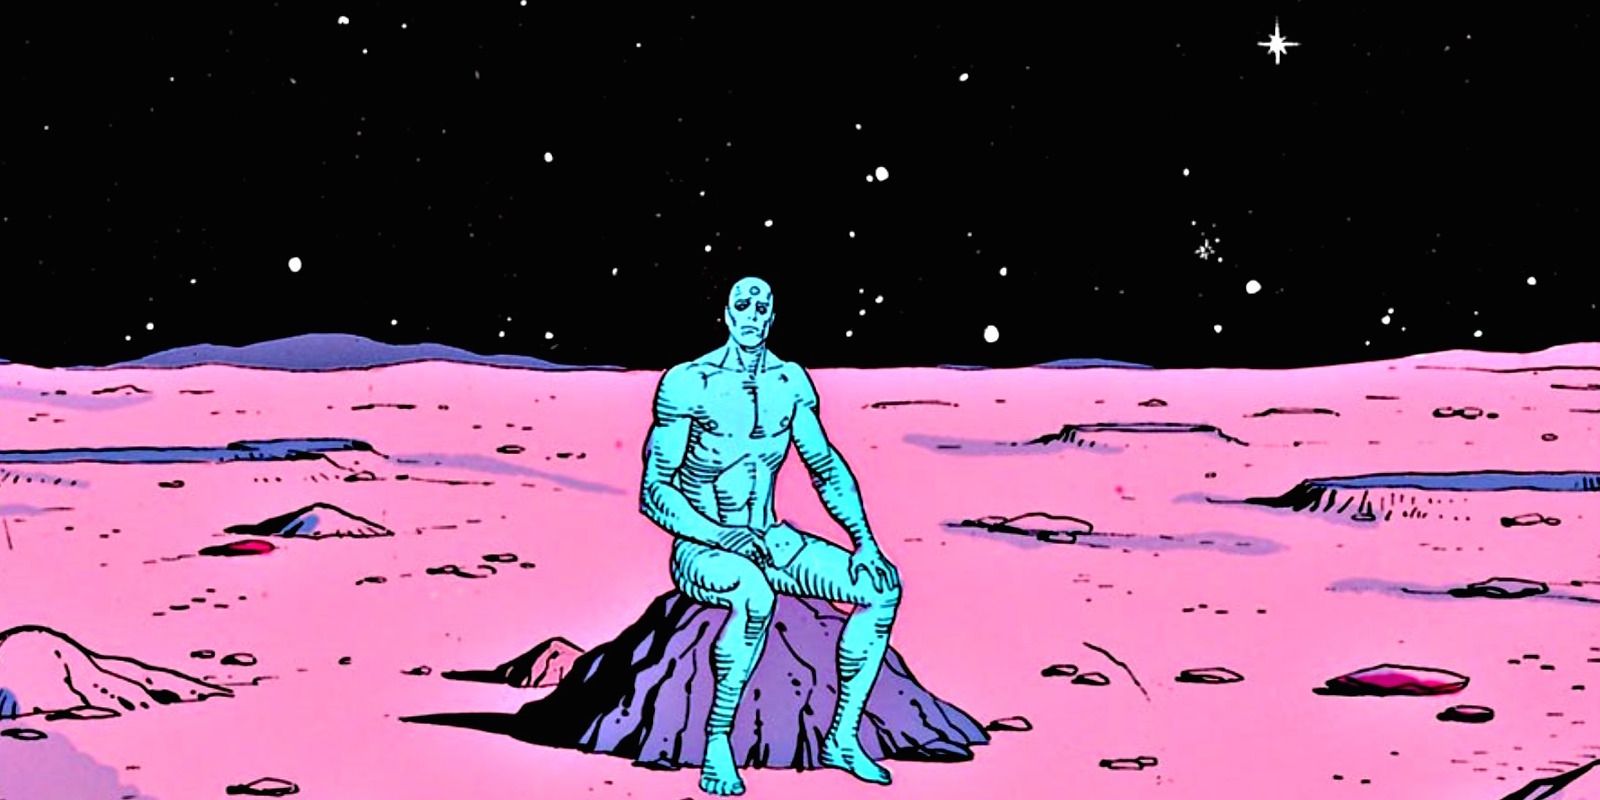 A nude Dr. Manhattan sits on the pink surface of the moon alone in the Watchmen comic.